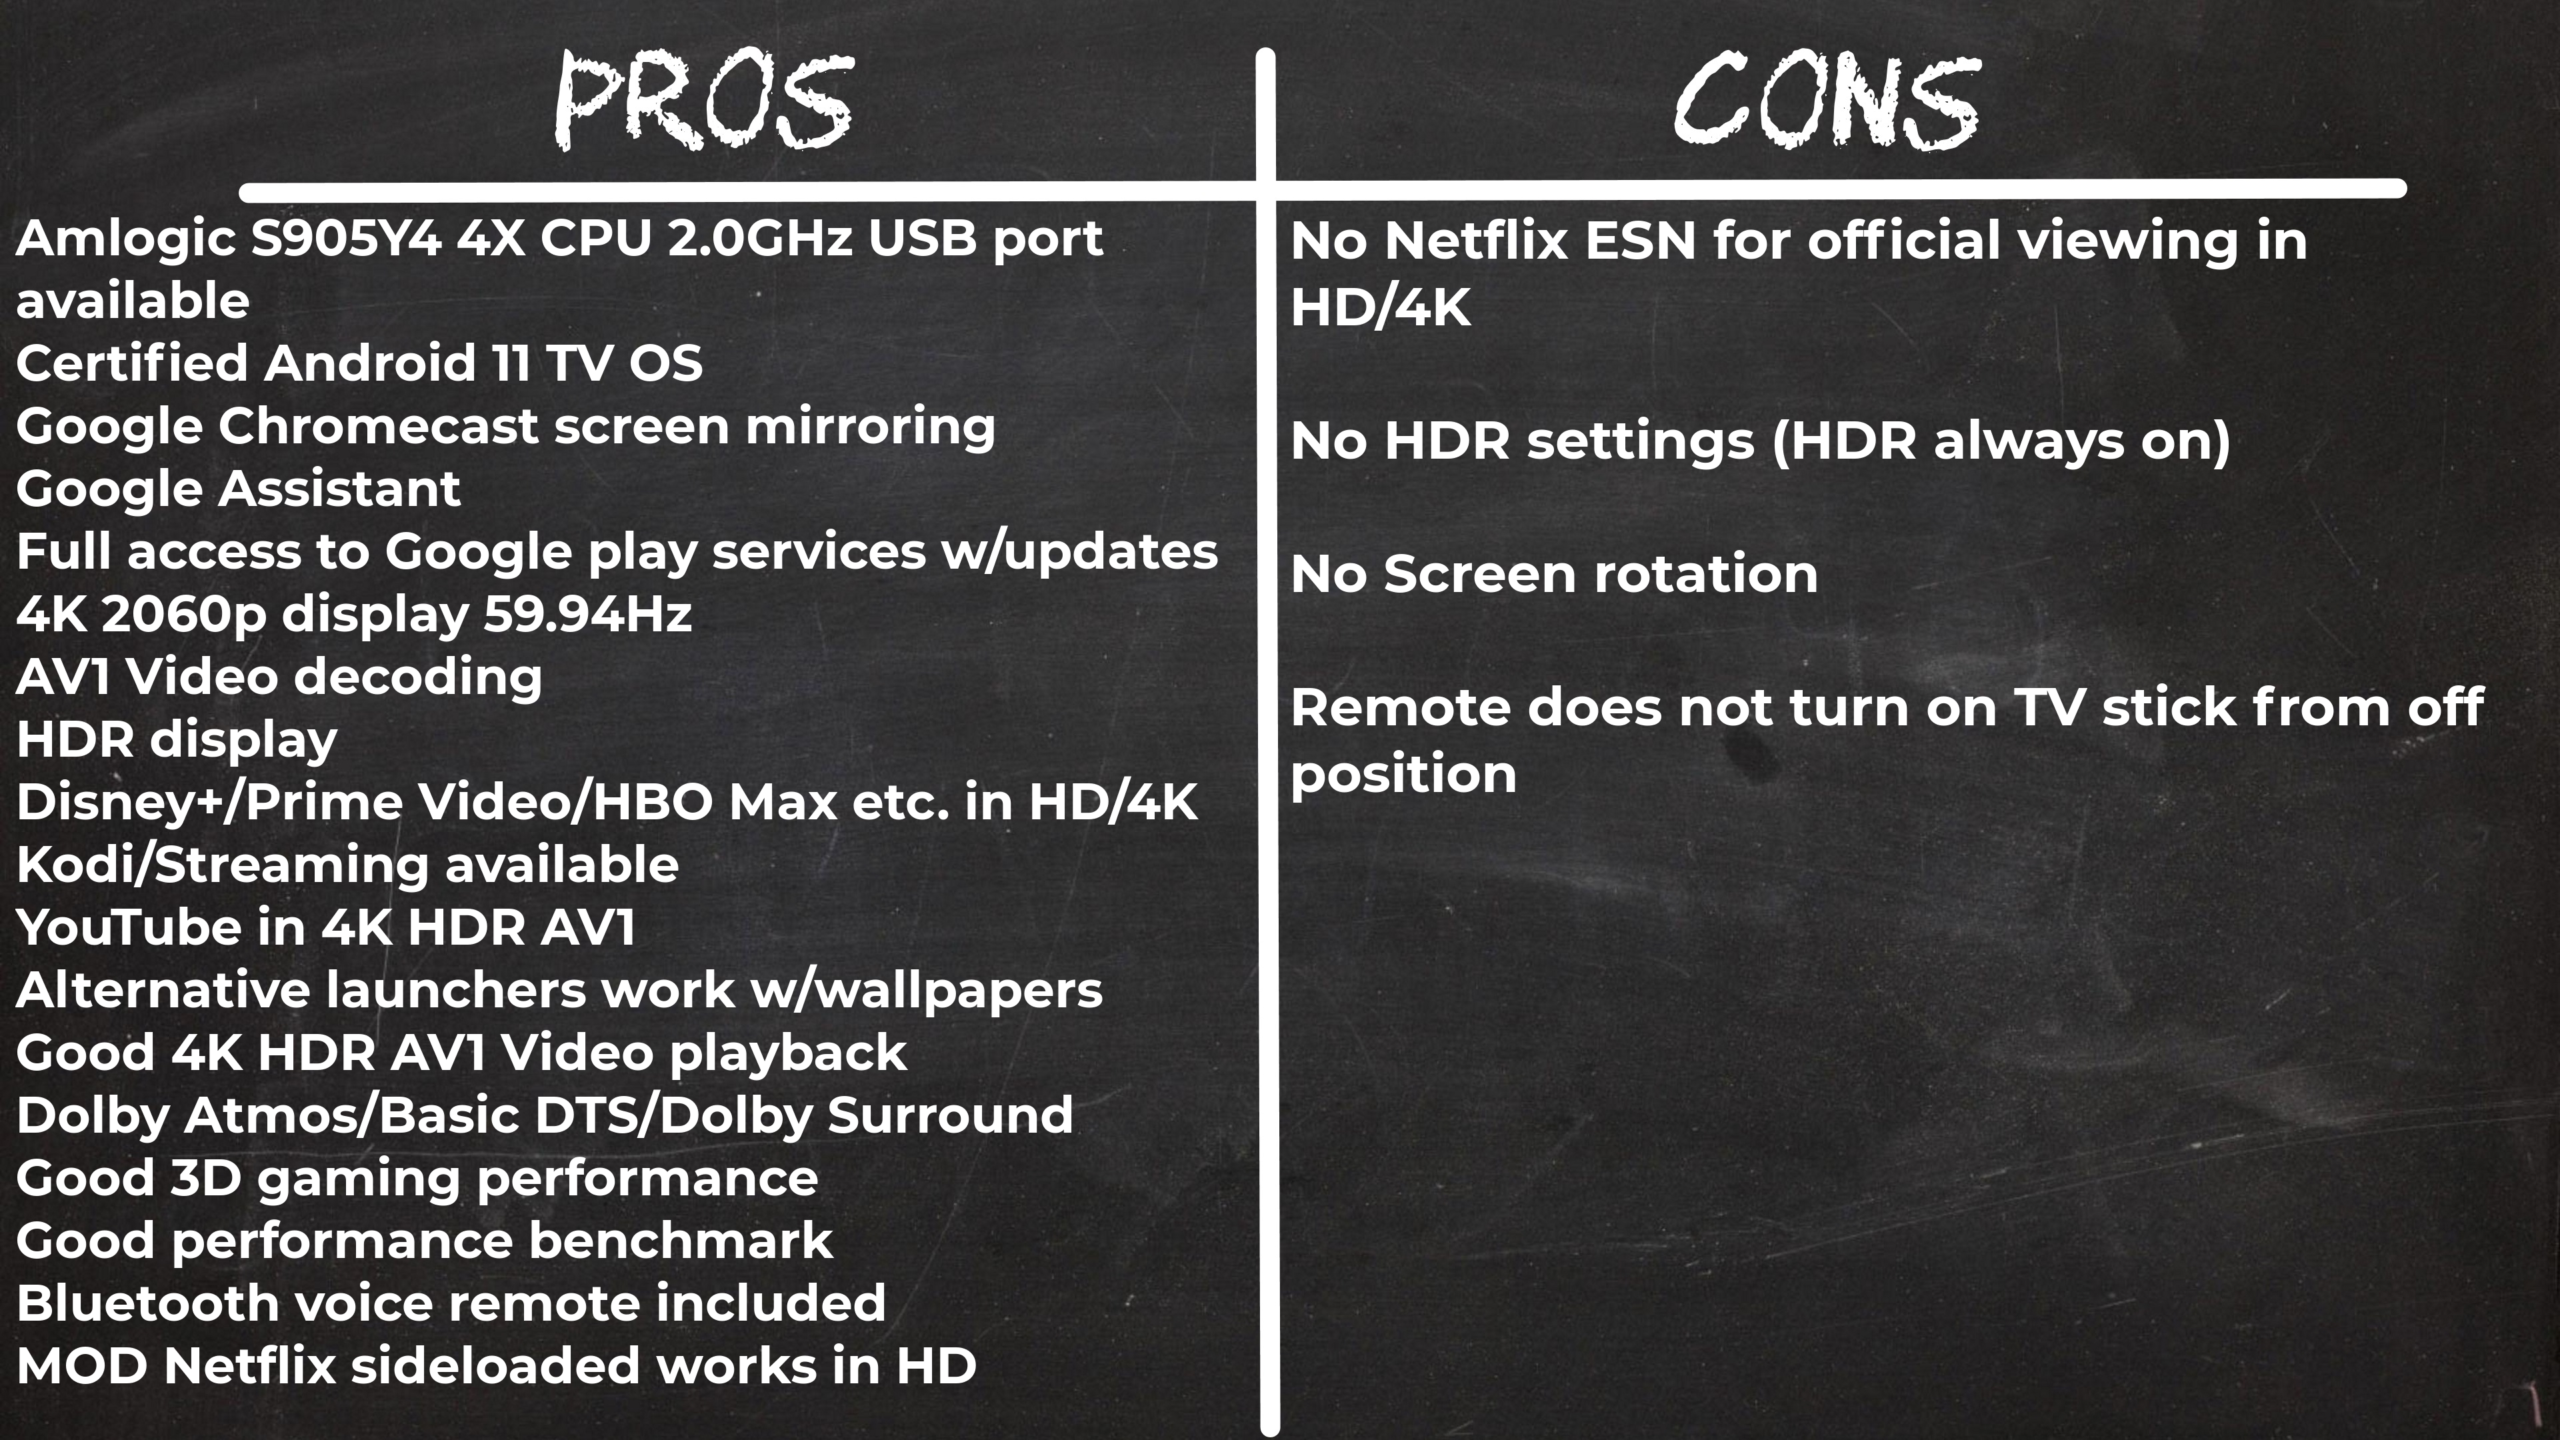 Mecool KD2 Pros and cons